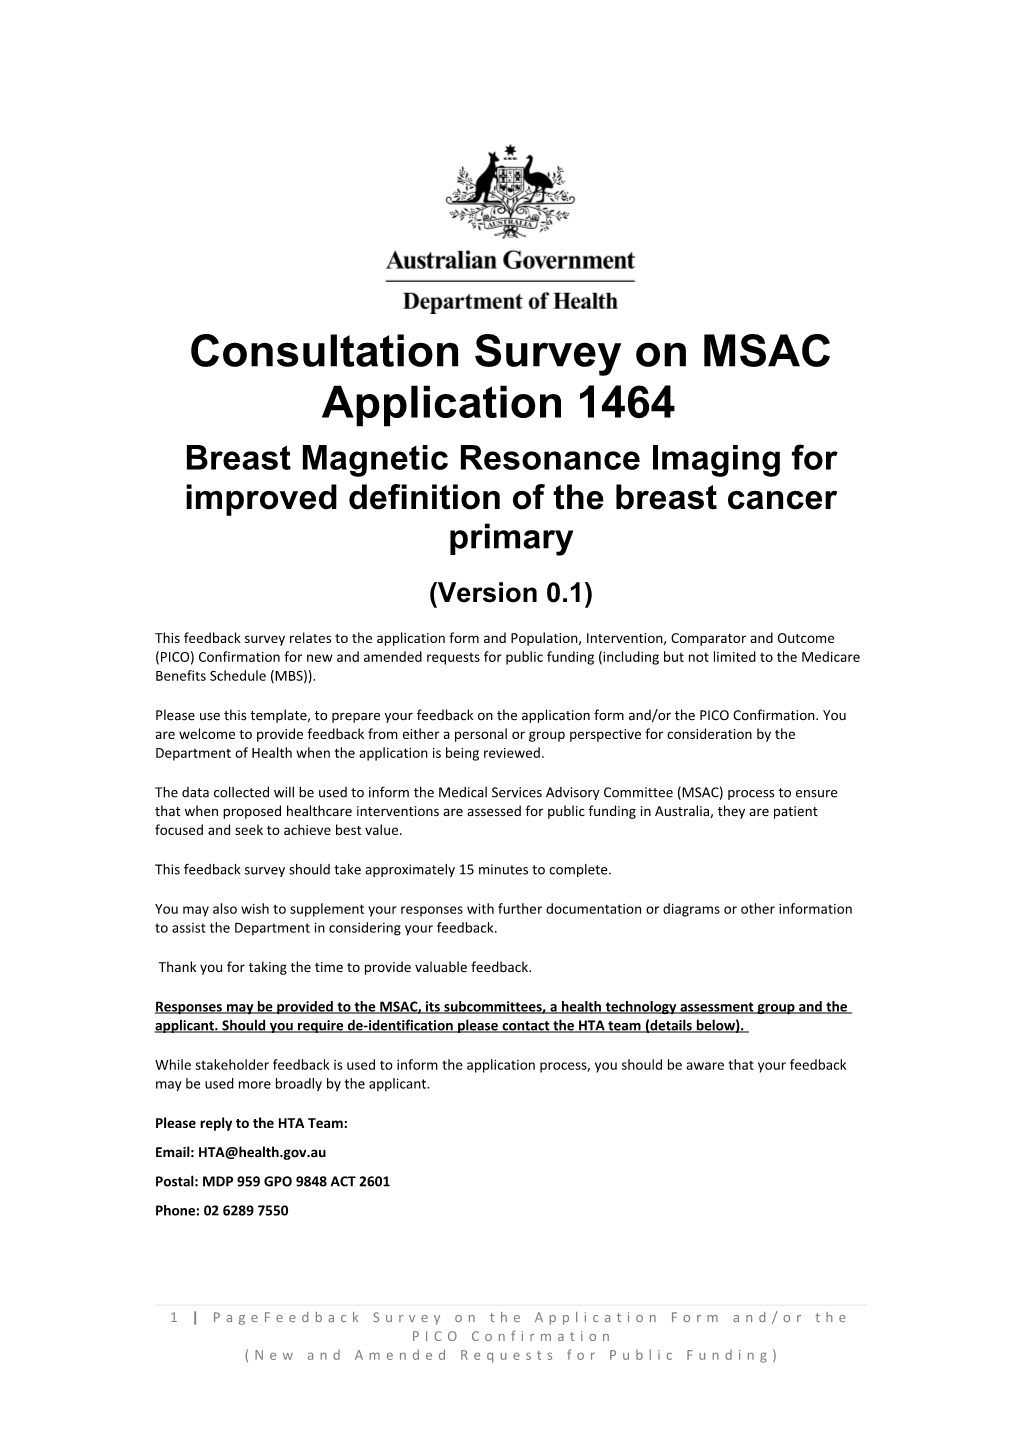 Breast Magnetic Resonance Imaging for Improved Definition of the Breast Cancer Primary